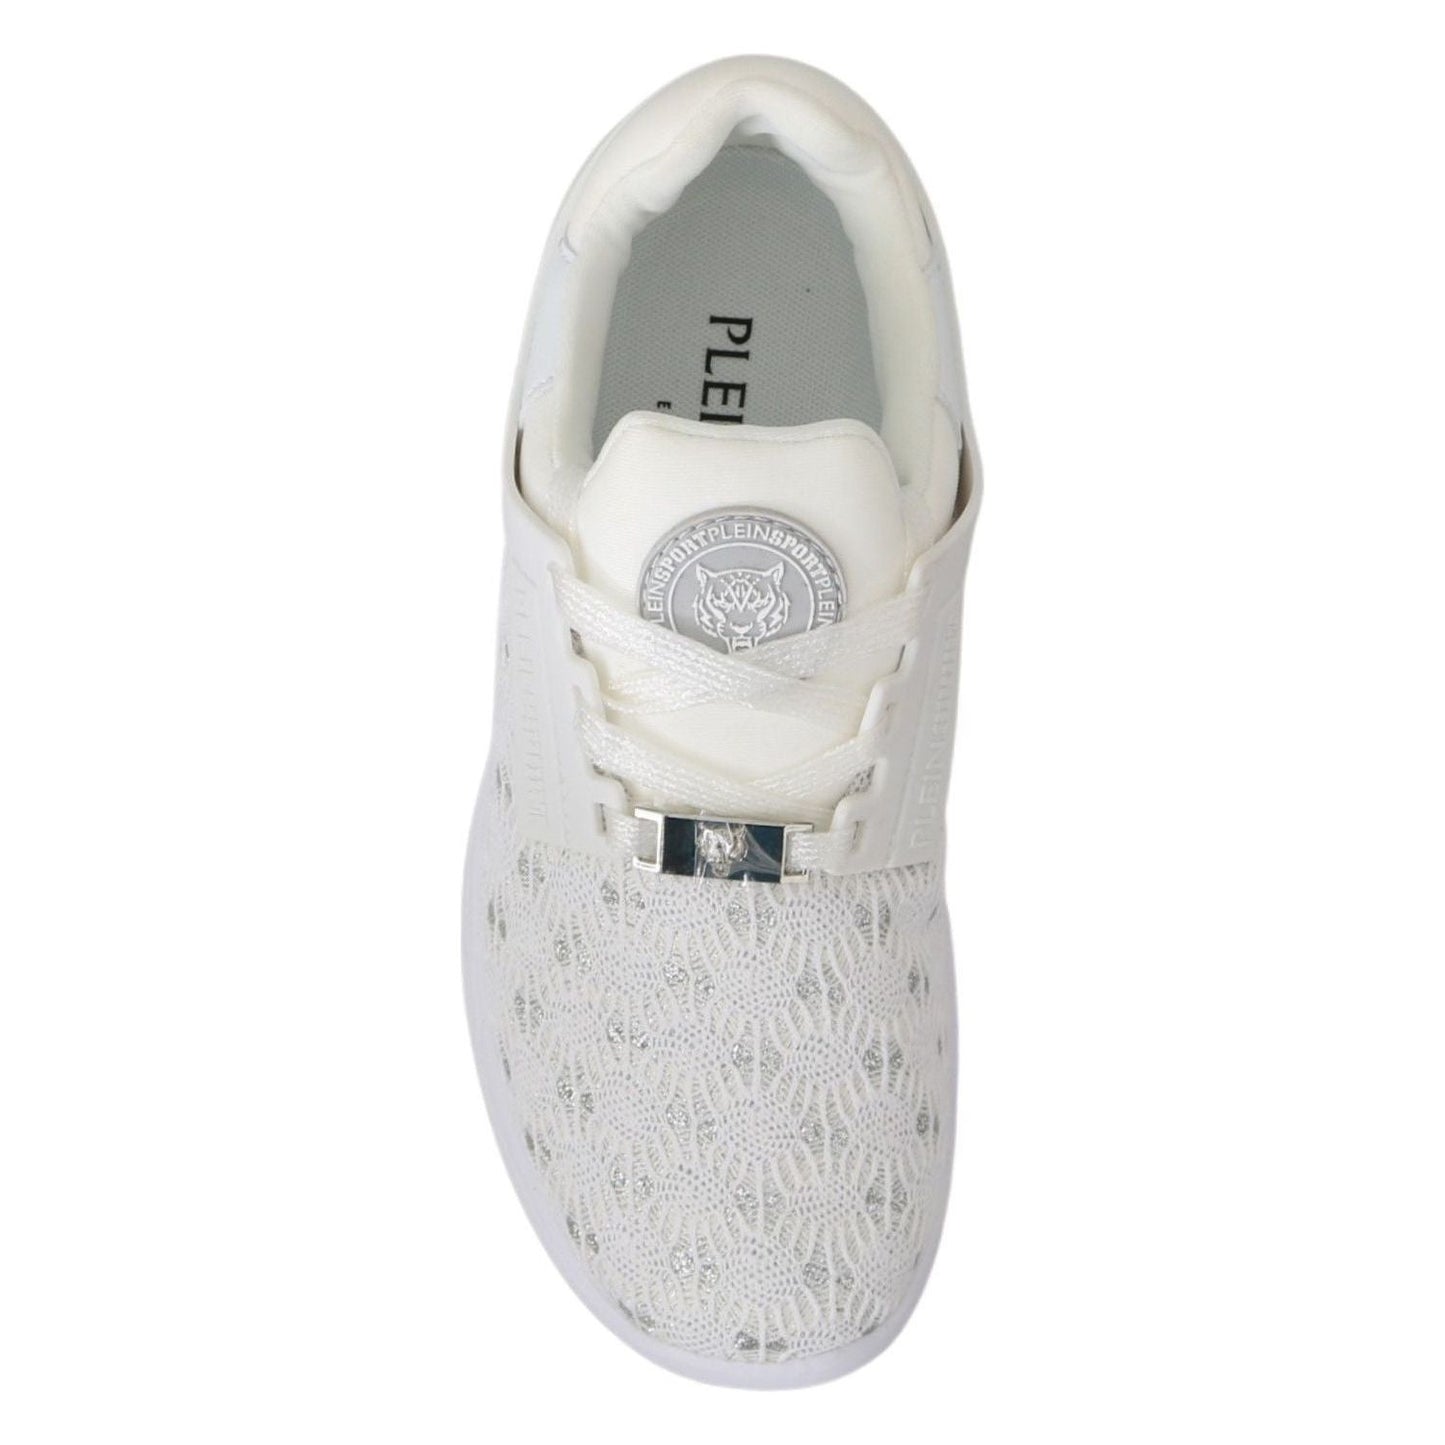 Philipp Plein Trendy White Beth Sneakers for Women WOMAN SNEAKERS white-polyester-casual-sneakers-shoes IMG_7634-f59e553e-462.jpg